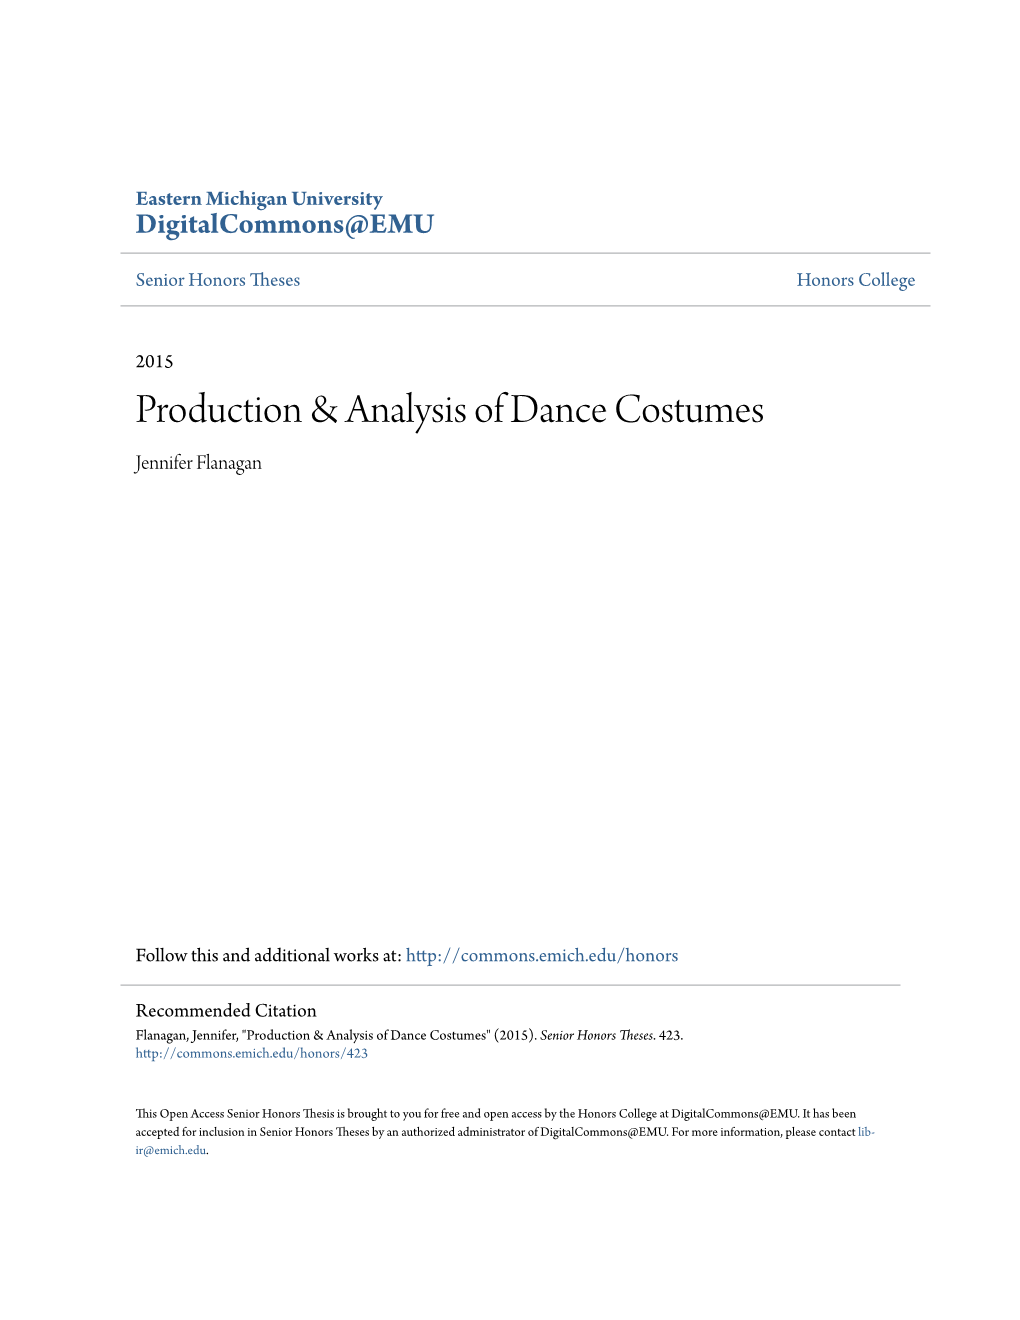 Production & Analysis of Dance Costumes